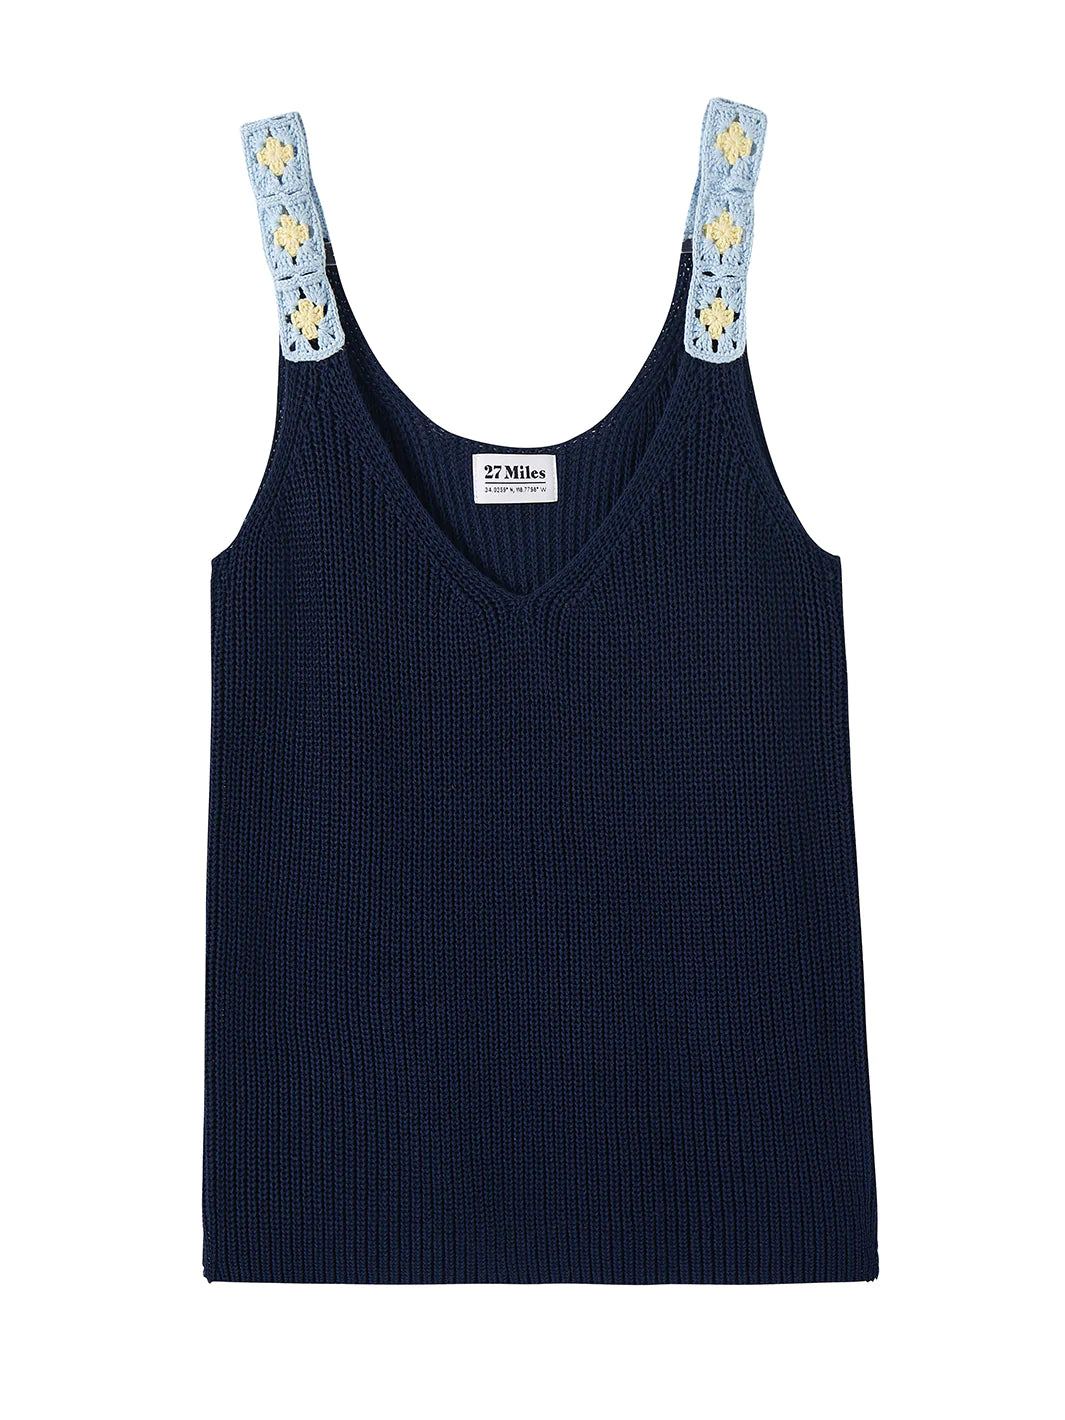 MADDI KNIT TANK IN NAVY - Romi Boutique